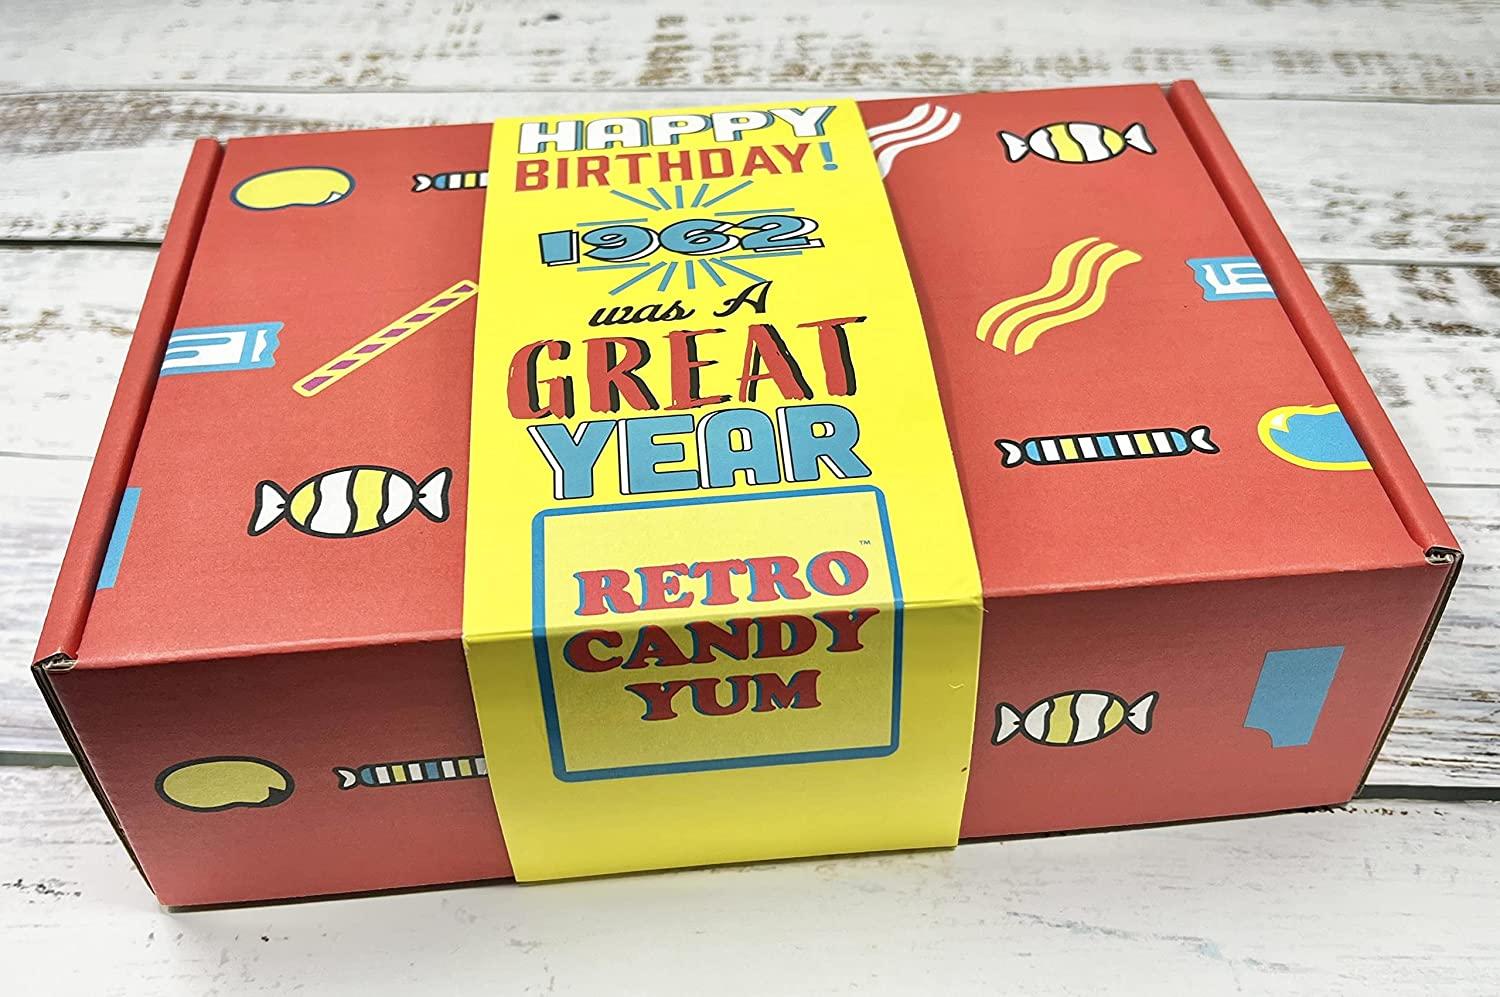 RETRO CANDY YUM 1962 60th Birthday Gift Box Nostalgic Candy Mix from Childhood for 60 Year Old Mom or Dad - 60th Birthday Gift Ideas for Men and Women Born Back in 1962 Jr